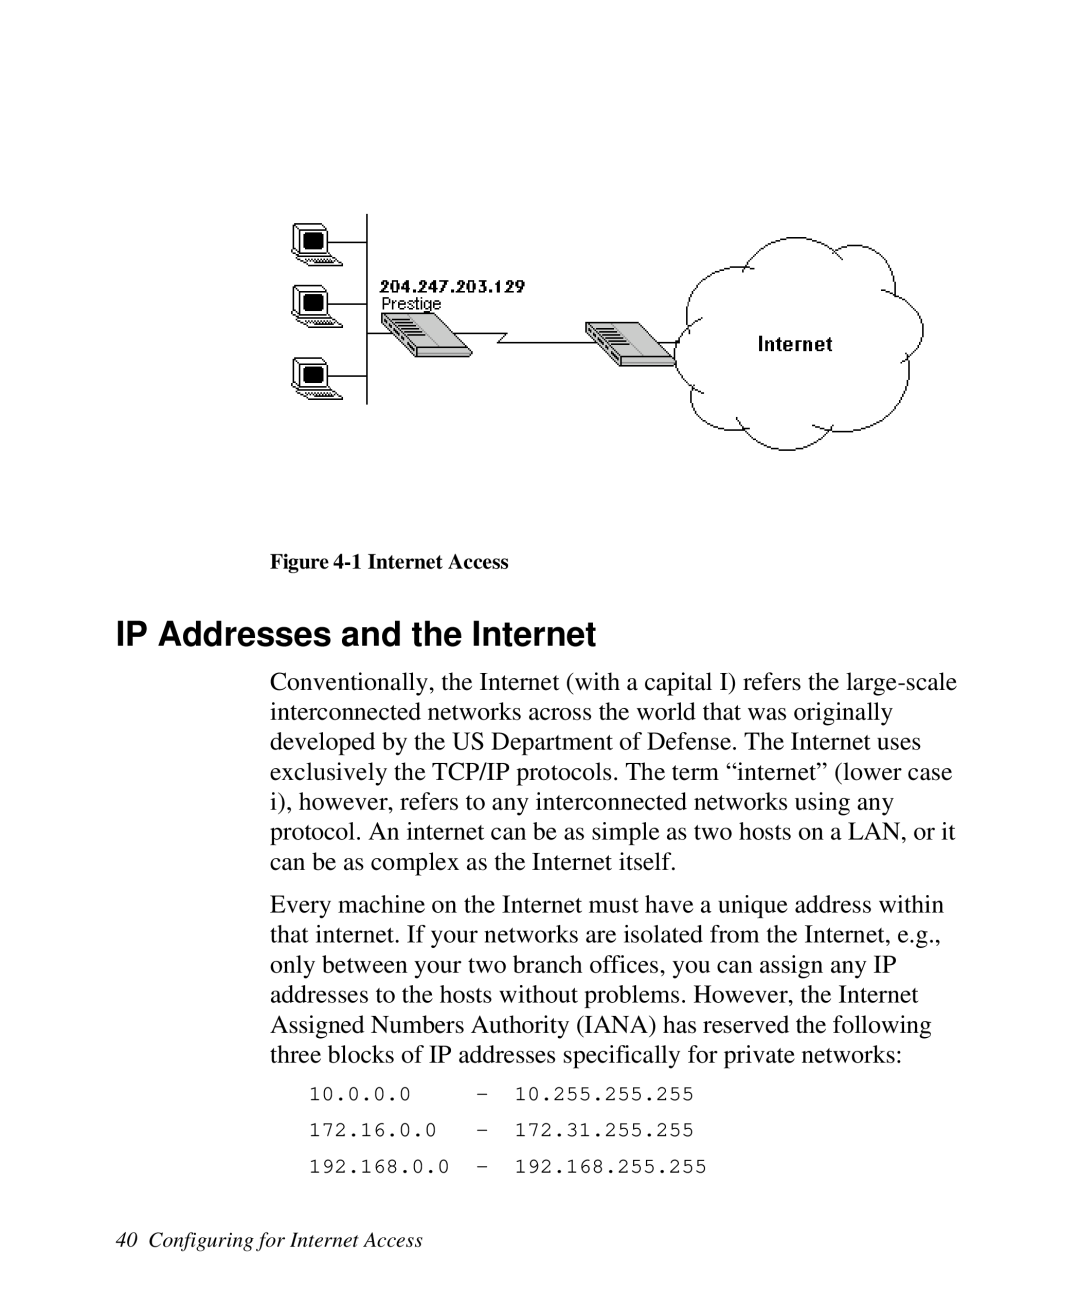 ZyXEL Communications Prestige100 user manual IP Addresses and the Internet, 1 Internet Access 